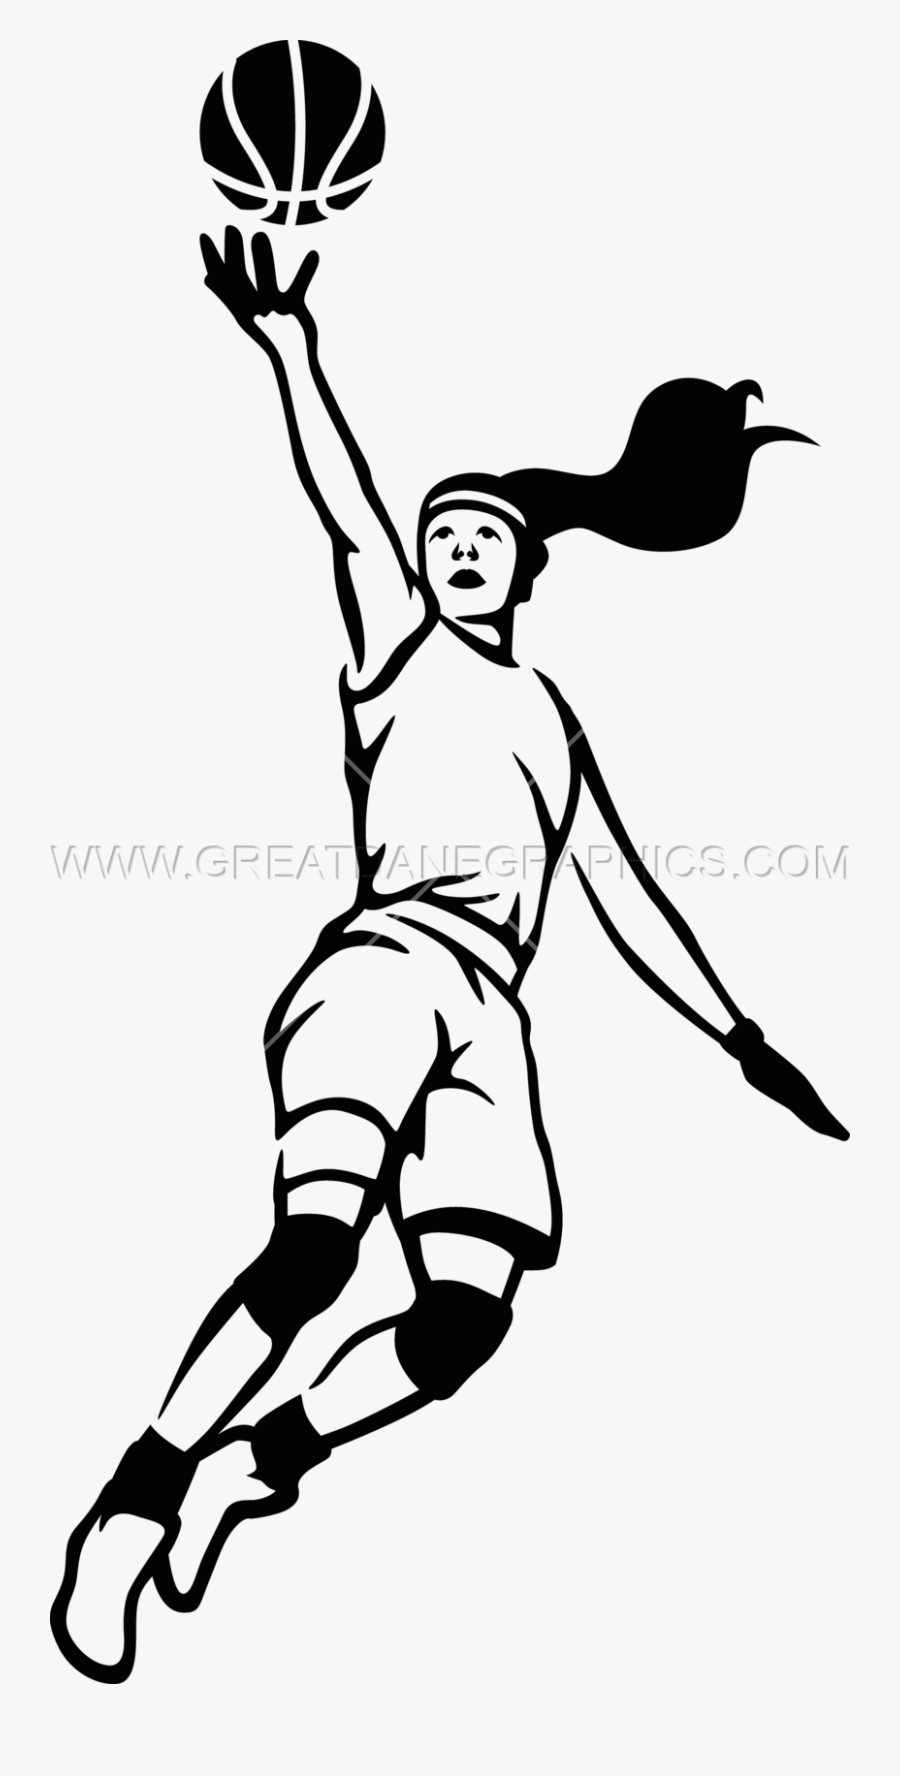 Basketball Player Drawing - Black And White Basketball Girl, Transparent Clipart